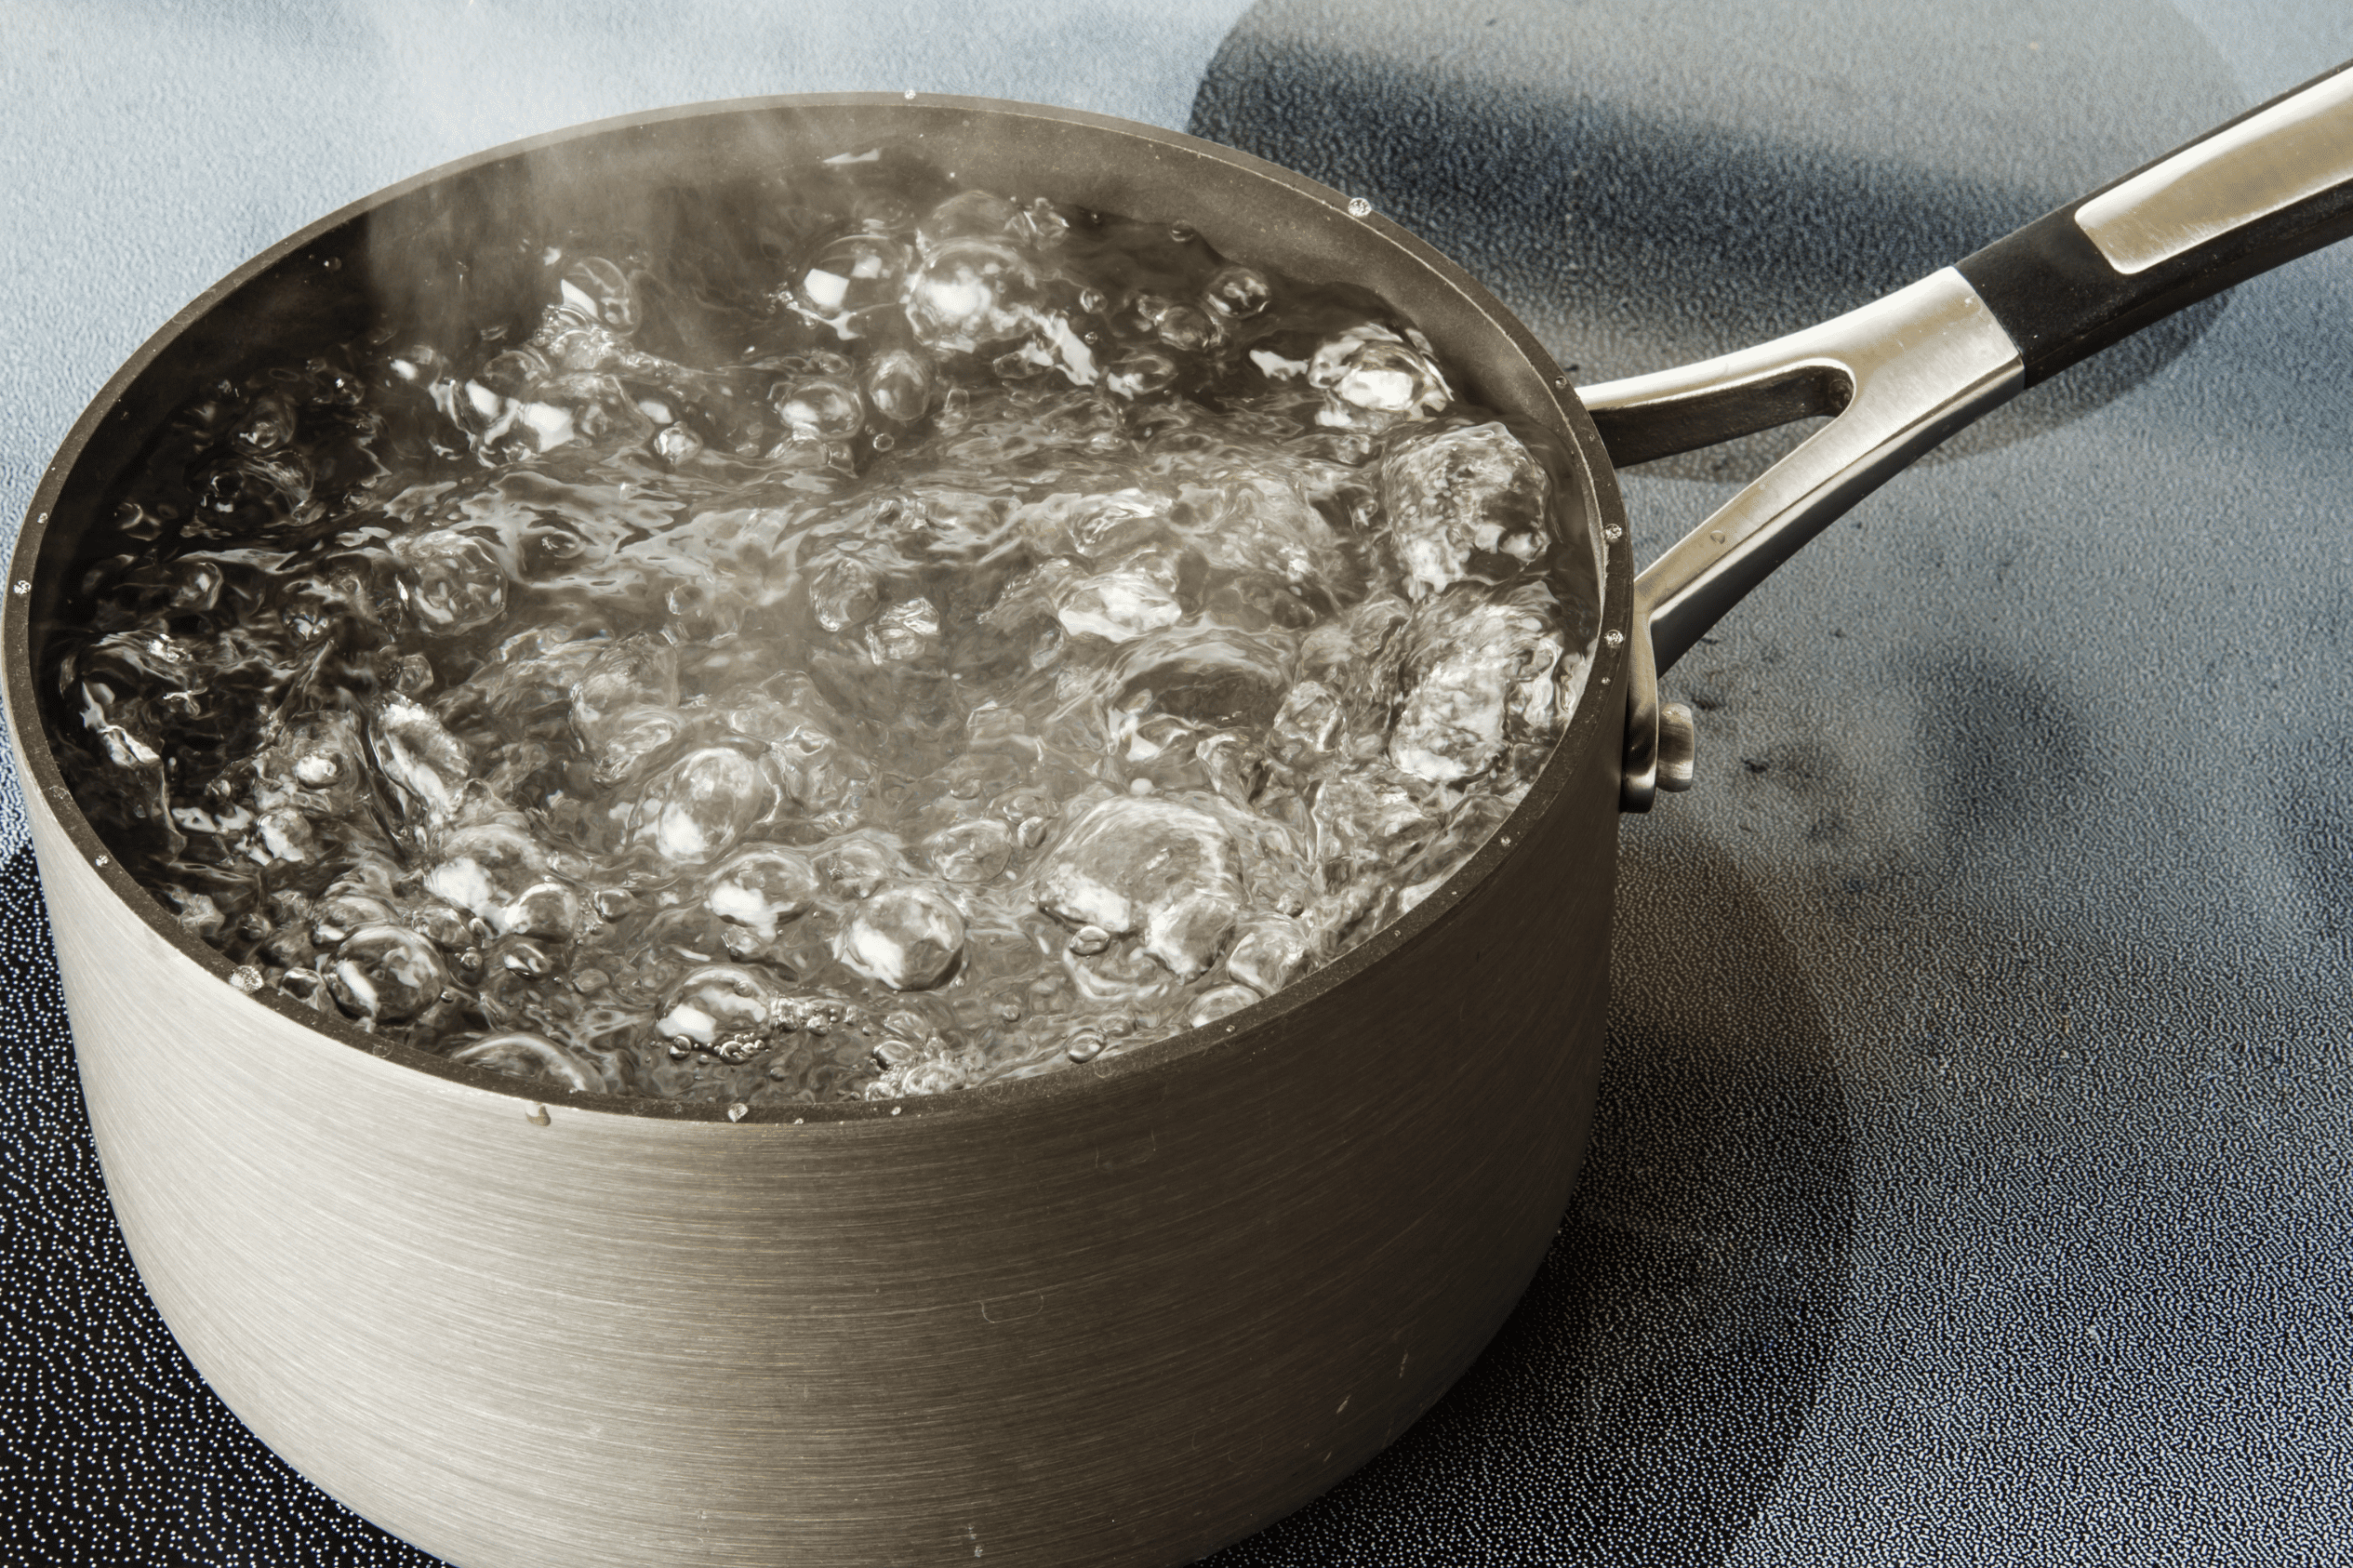 What To Do During a Boil Water Advisory?